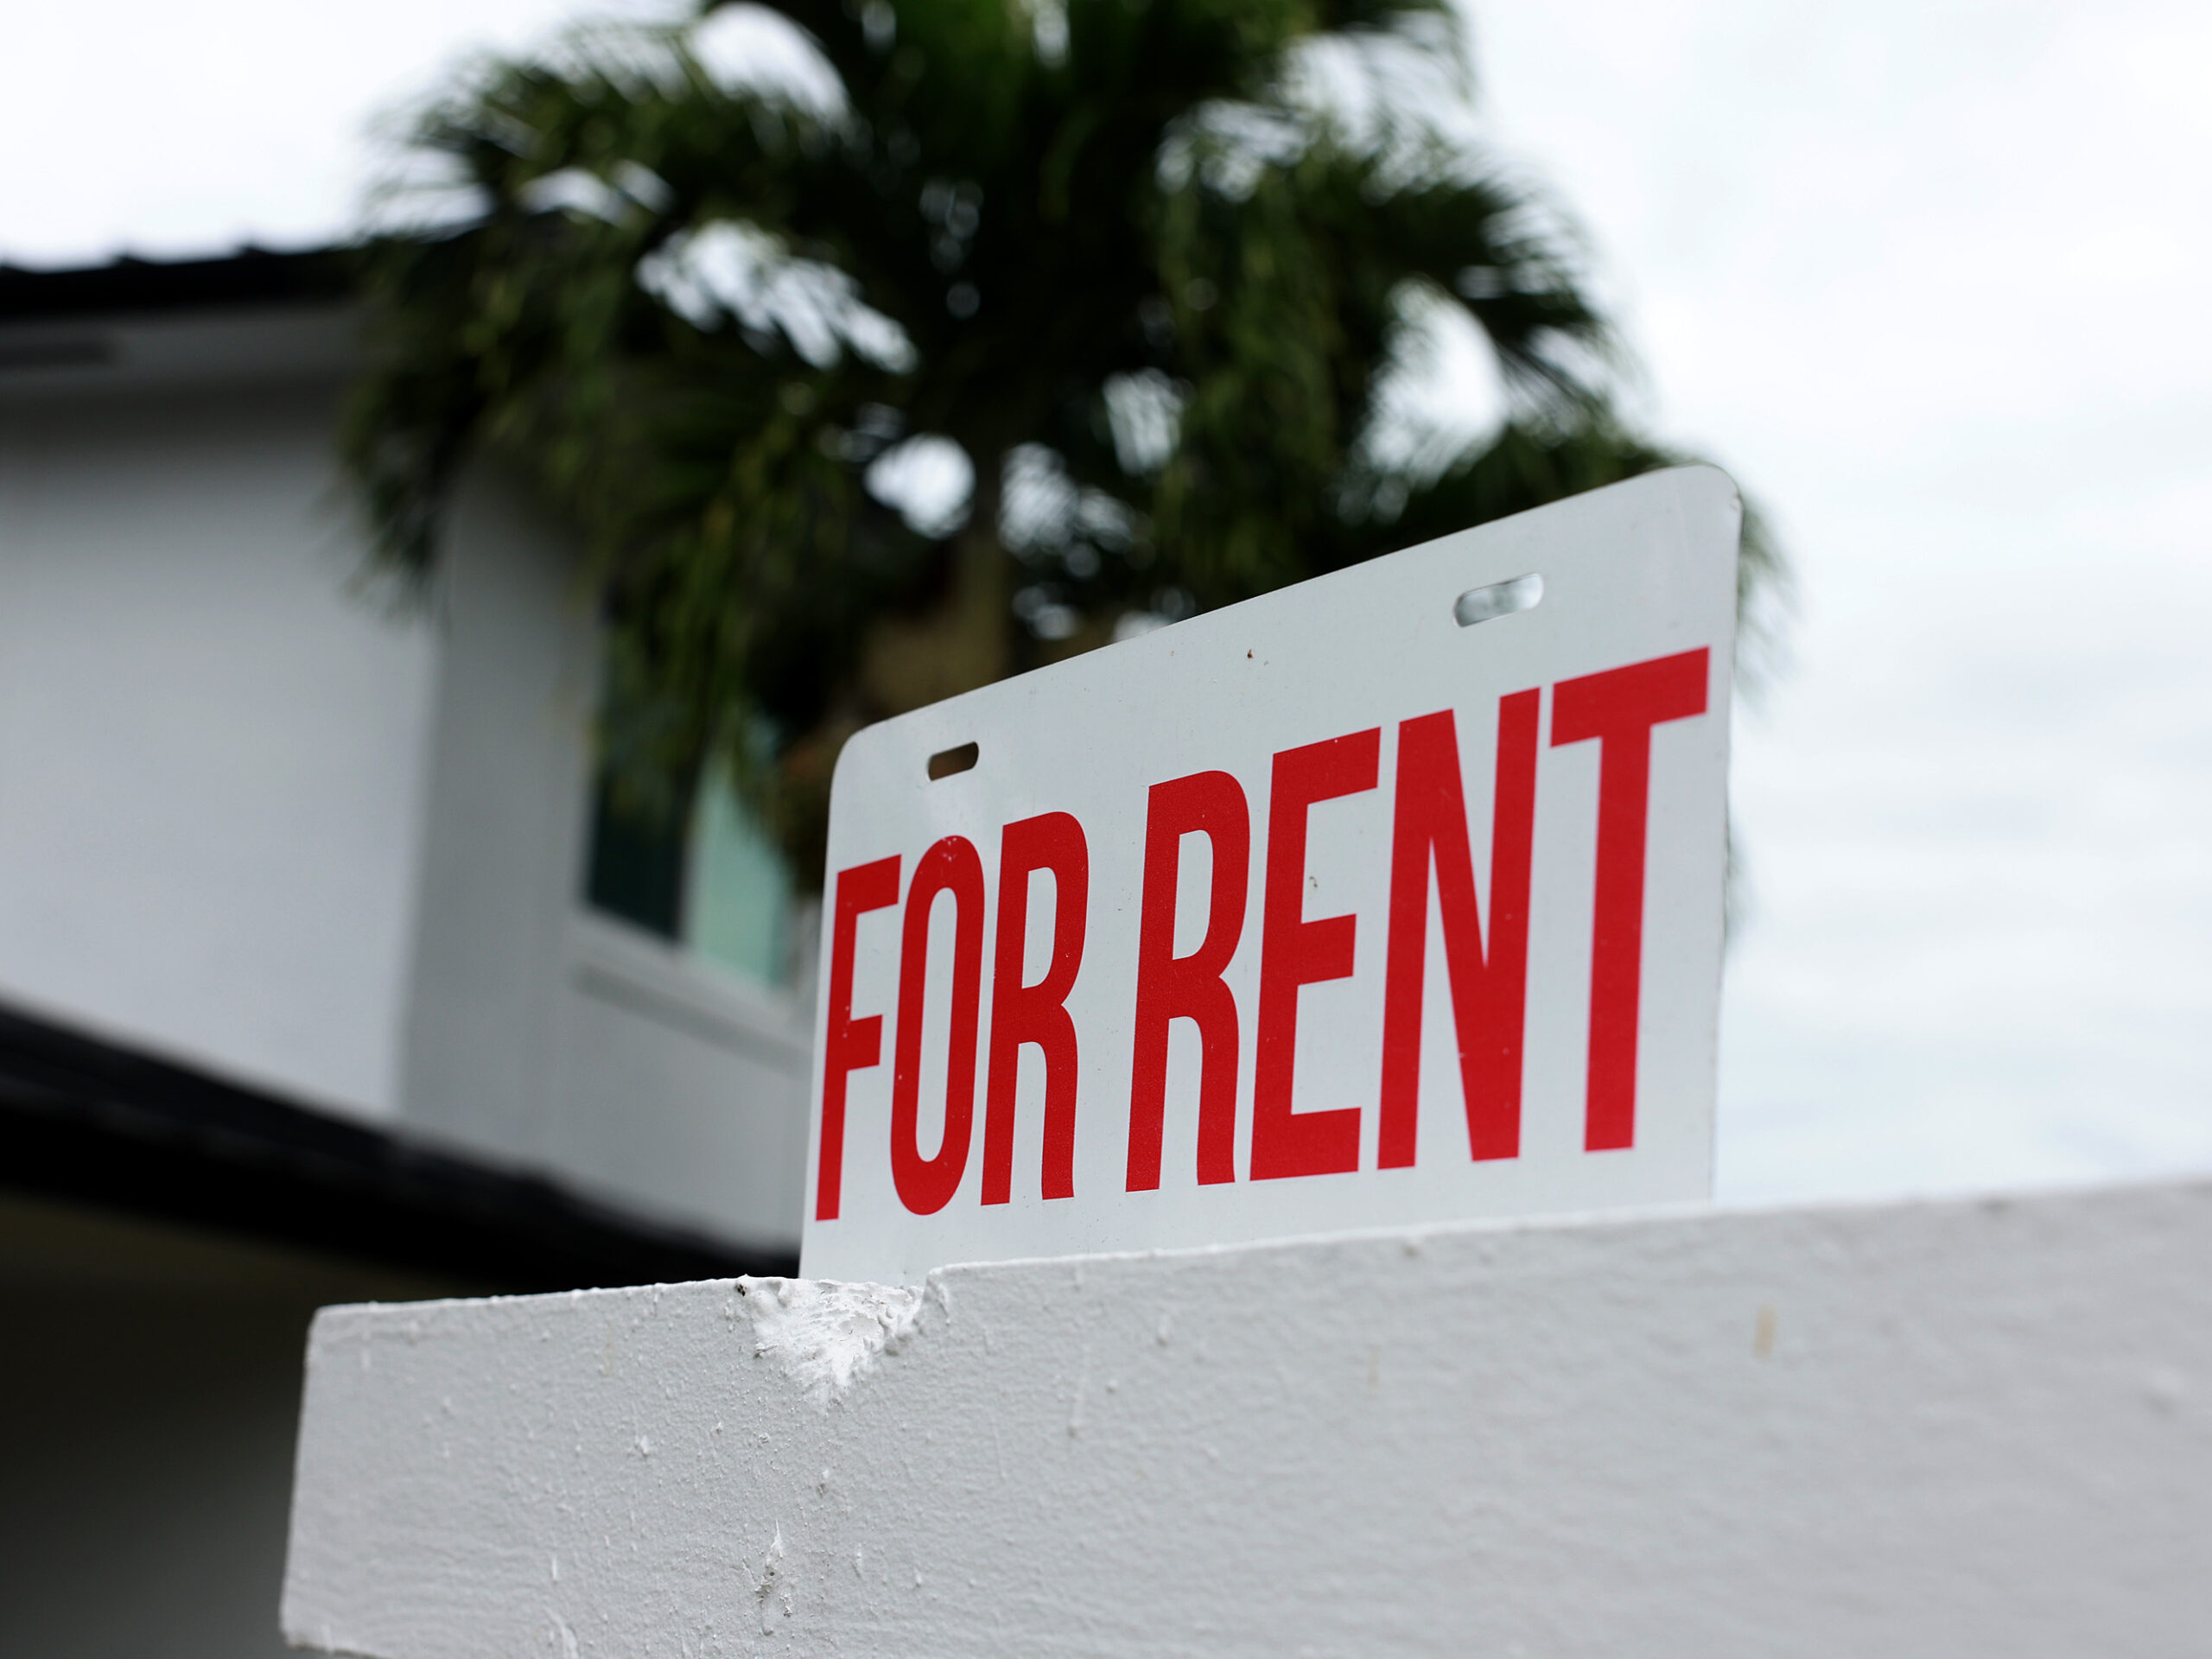 A "for rent" sign in front of a home in December 2023 in Miami, Florida.